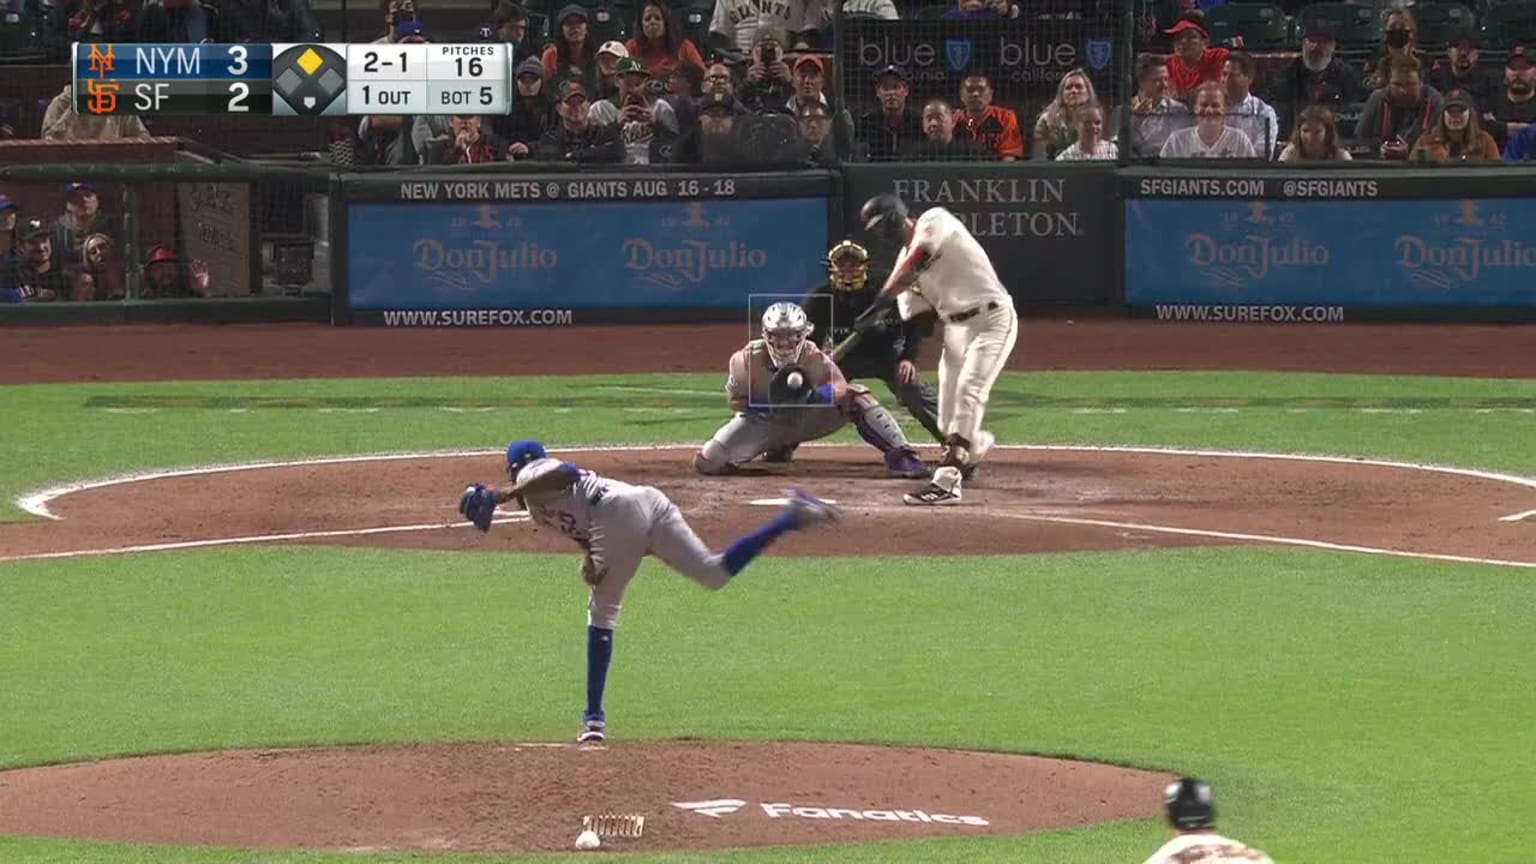 Chris Bryant turns the game against the Mets with the Giants with his second home run